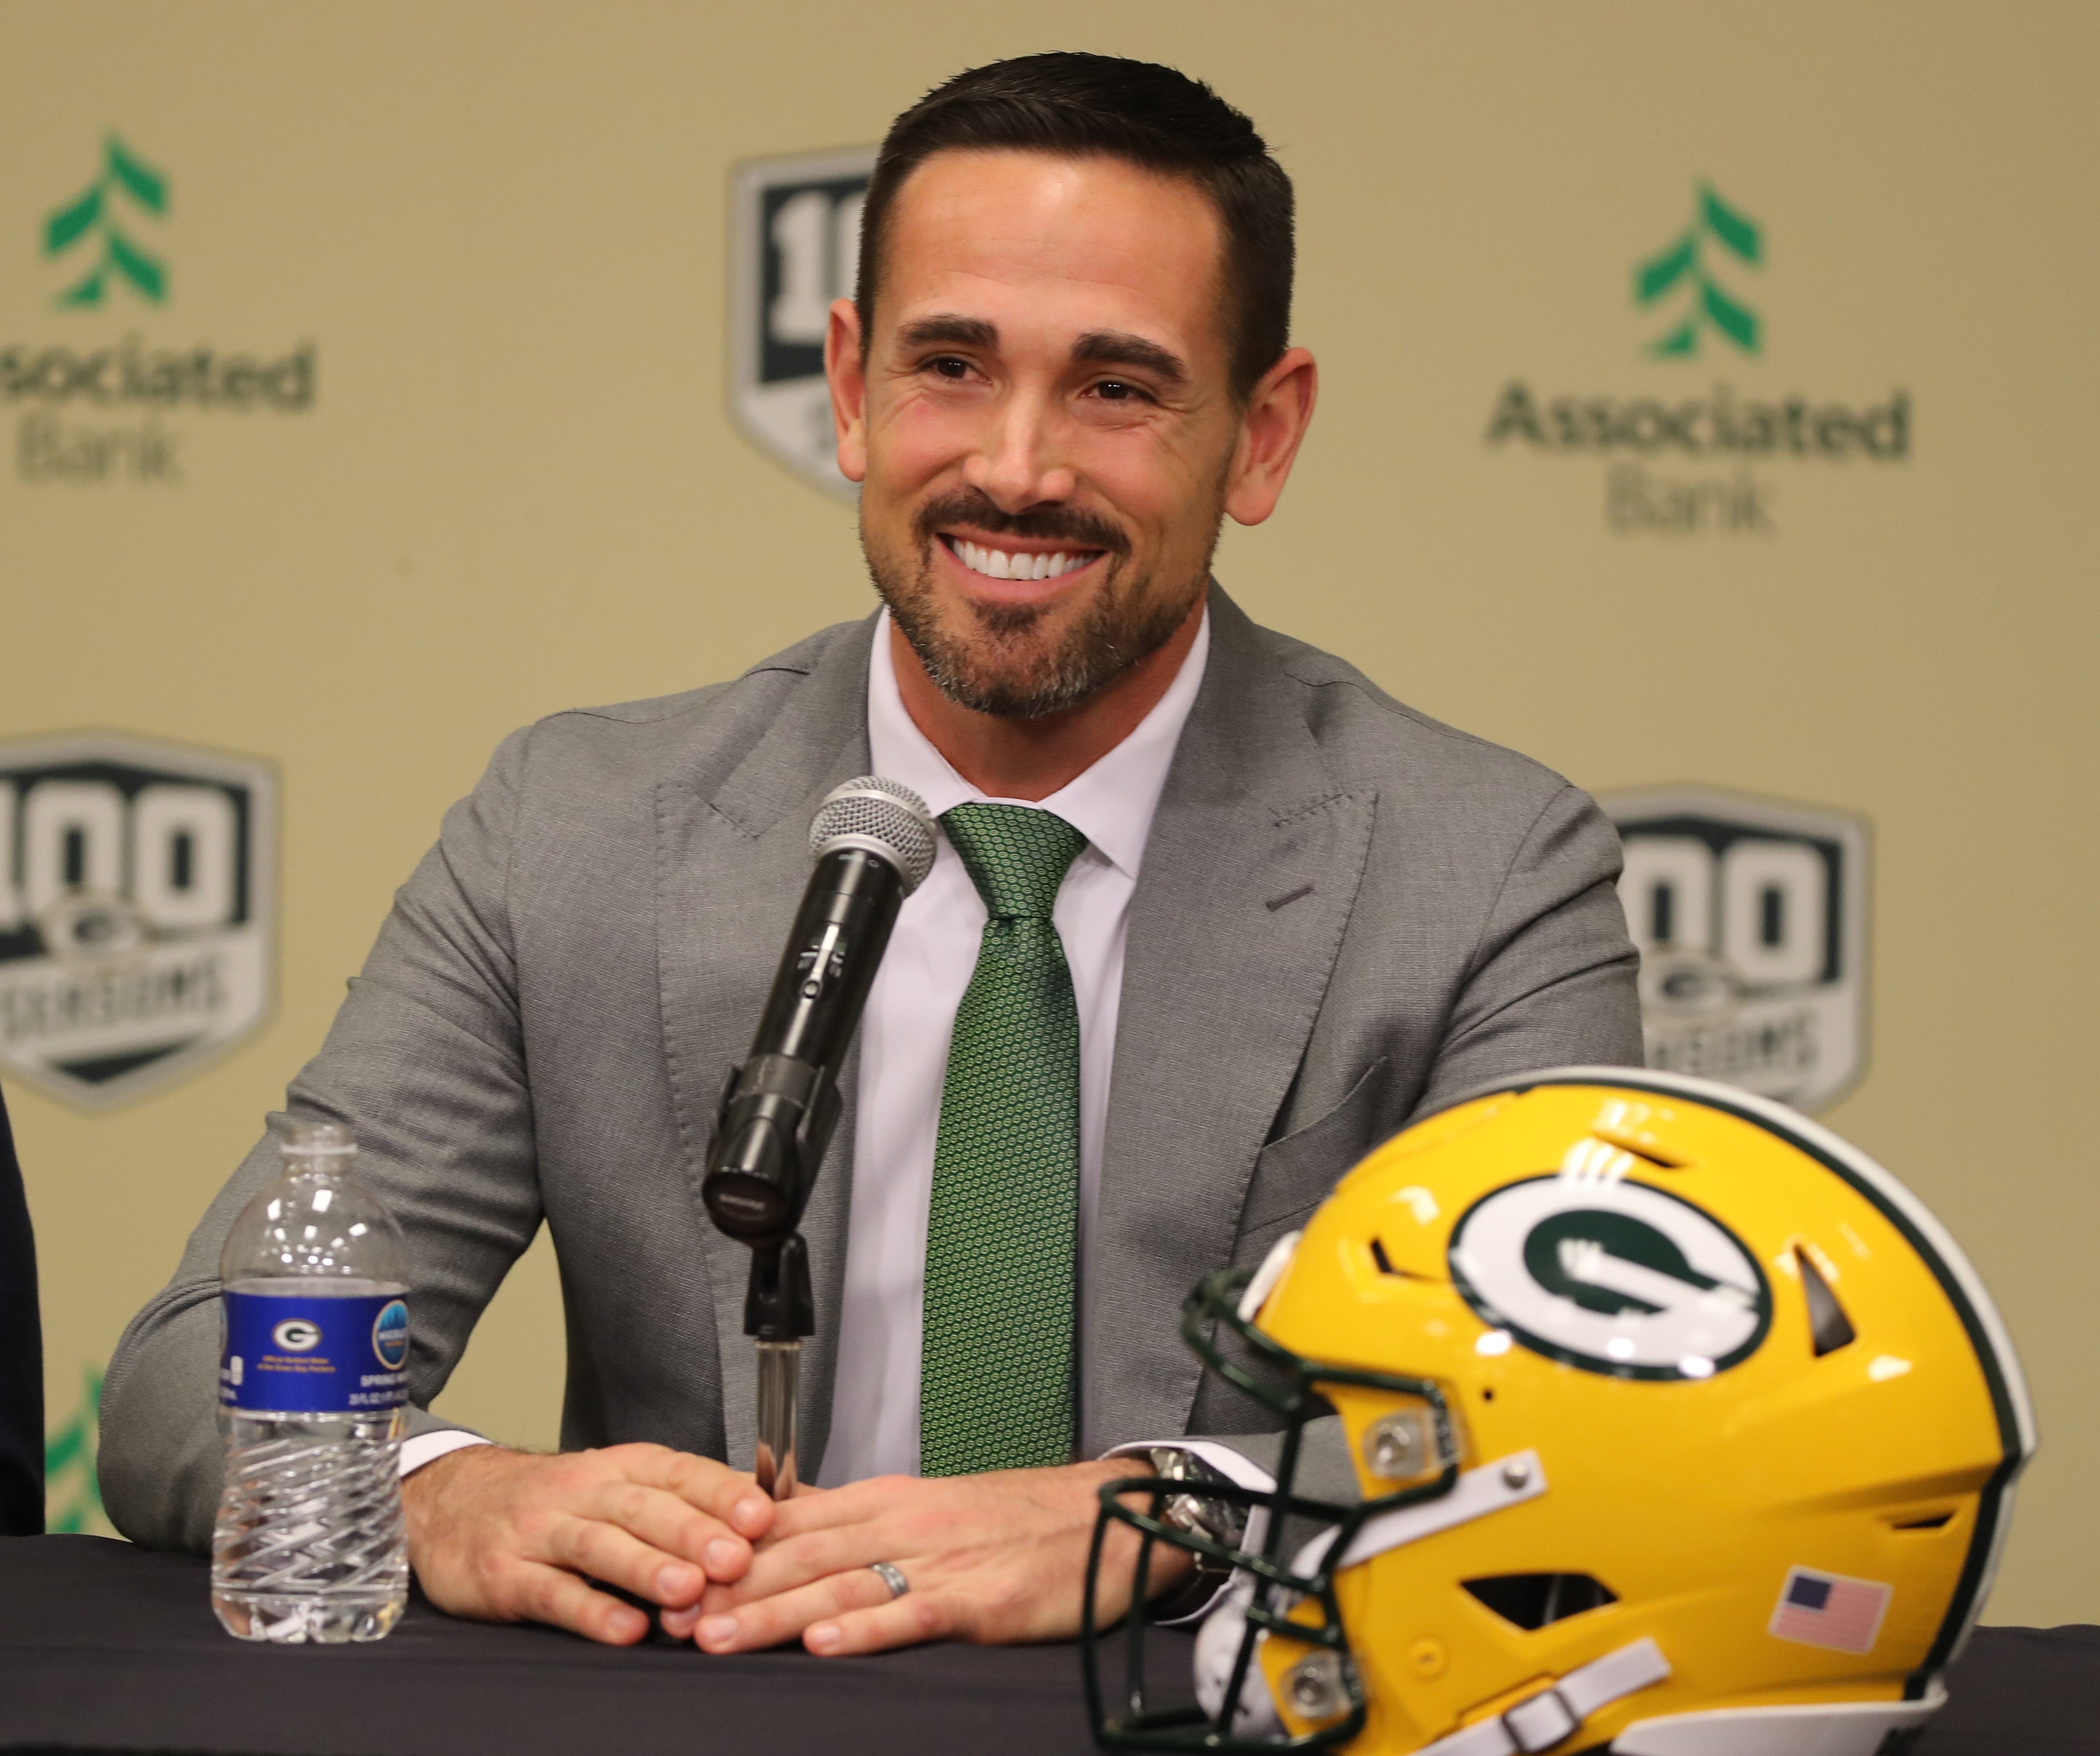 New Green Bay Packers head coach Matt LaFleur is introduced during a press conference in the Lambeau Field media auditorium Wednesday, January 9, 2019 in Green Bay, Wis.